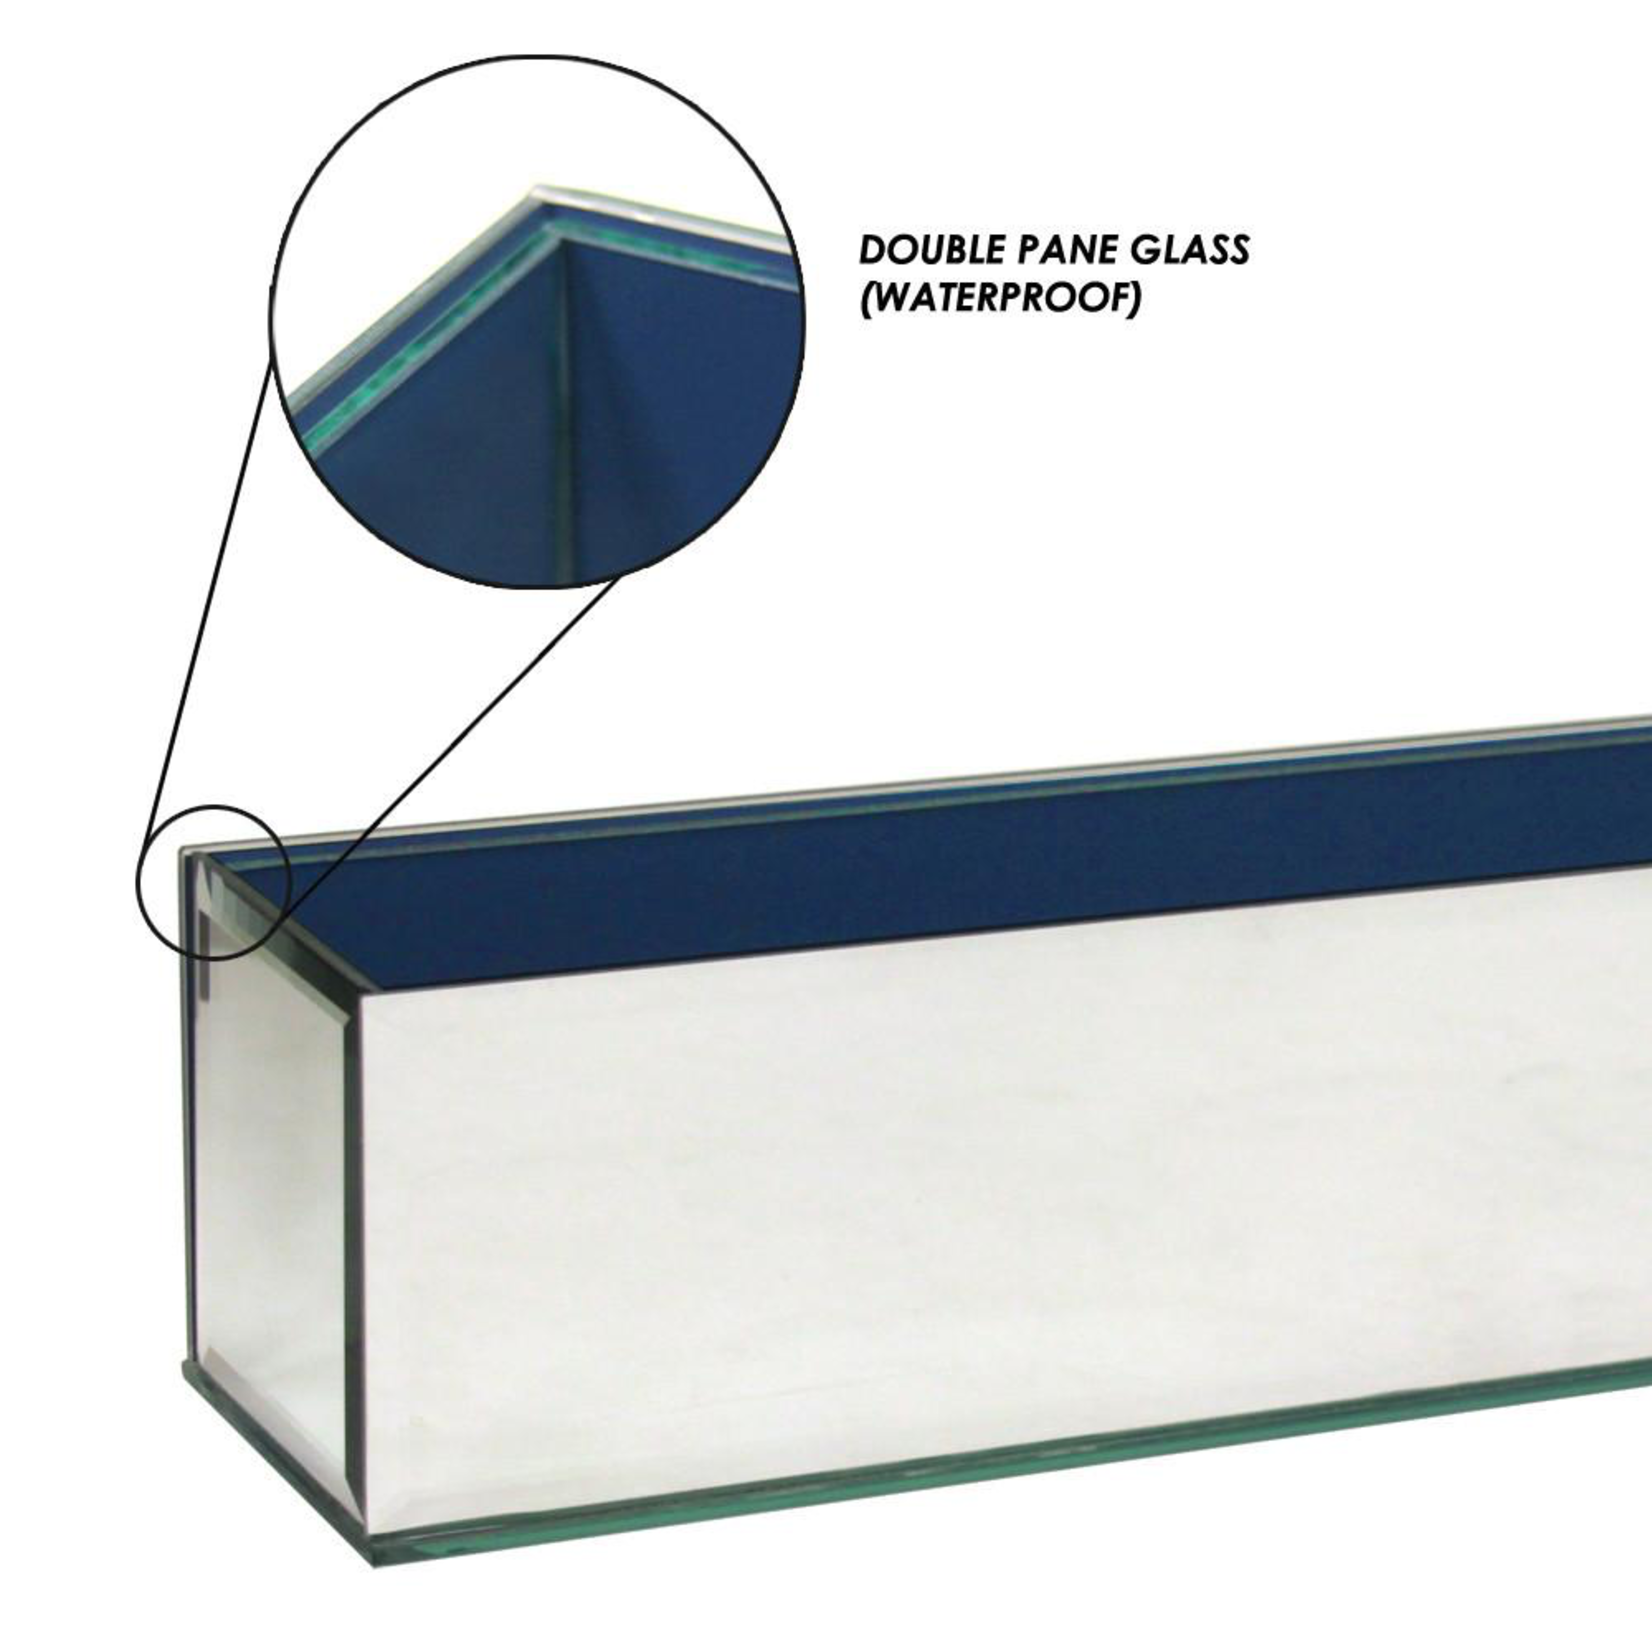 4” X 4” X 24” RECTANGLE MIRROR GLASS BOX CAN BE MARKED G3003S